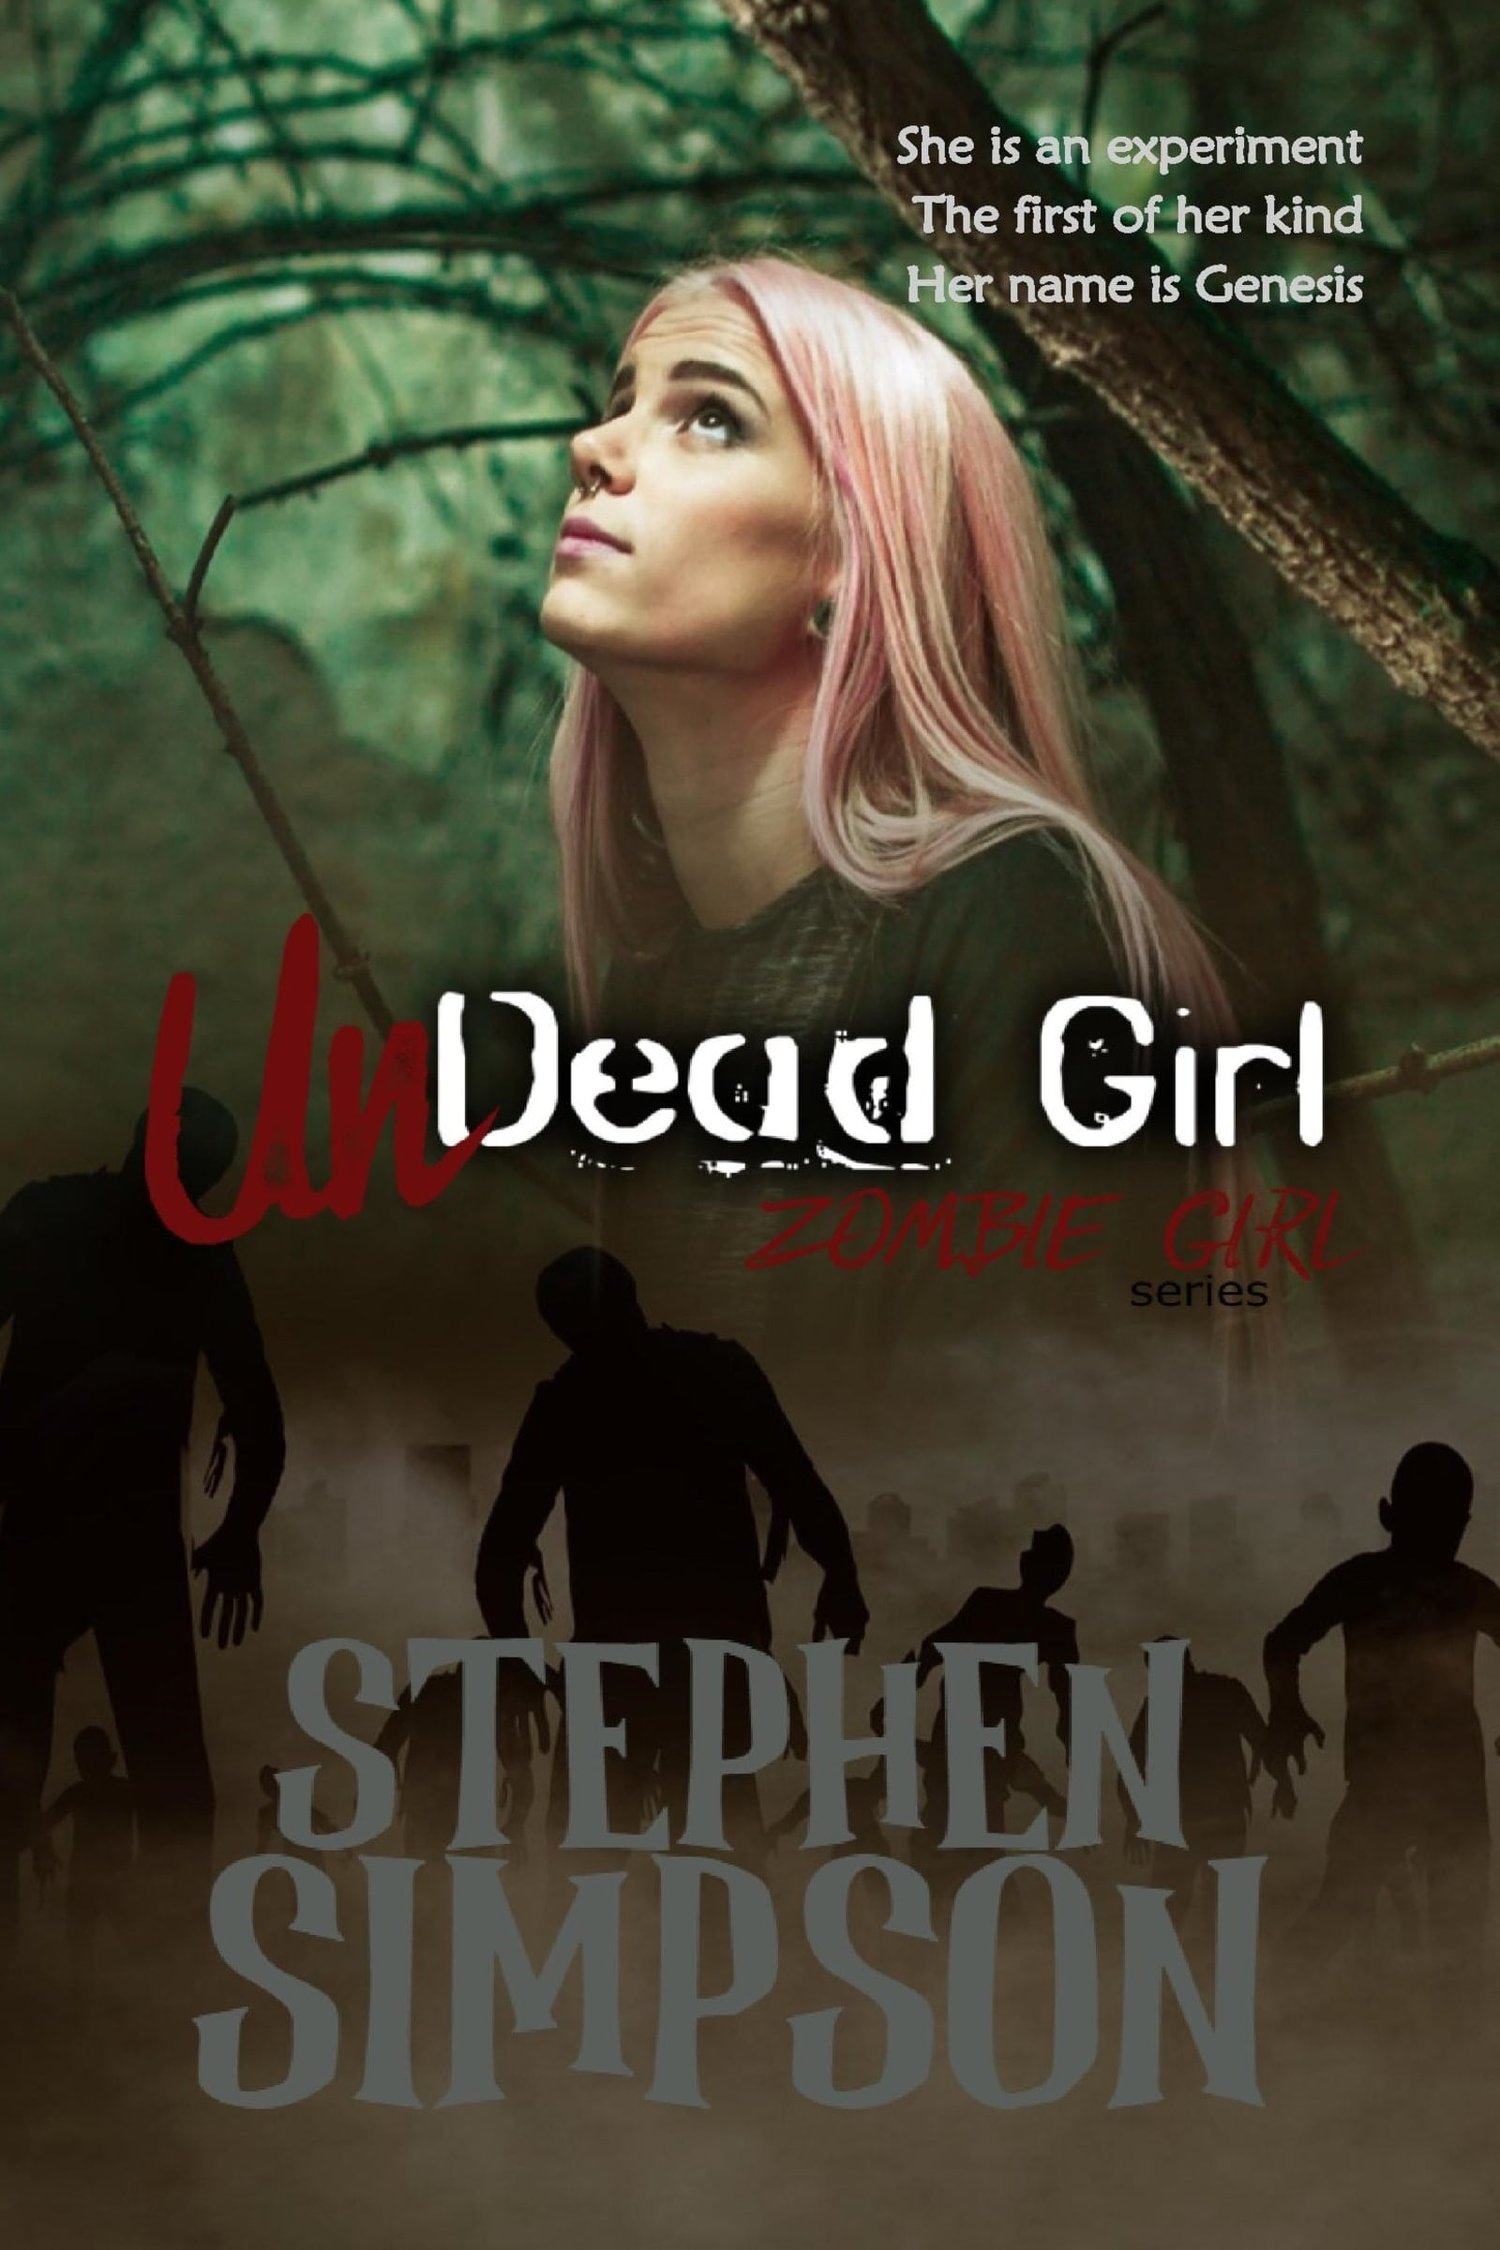 UnDead Girl by Stephen Simpson | Young Adult Zombie Horror Book